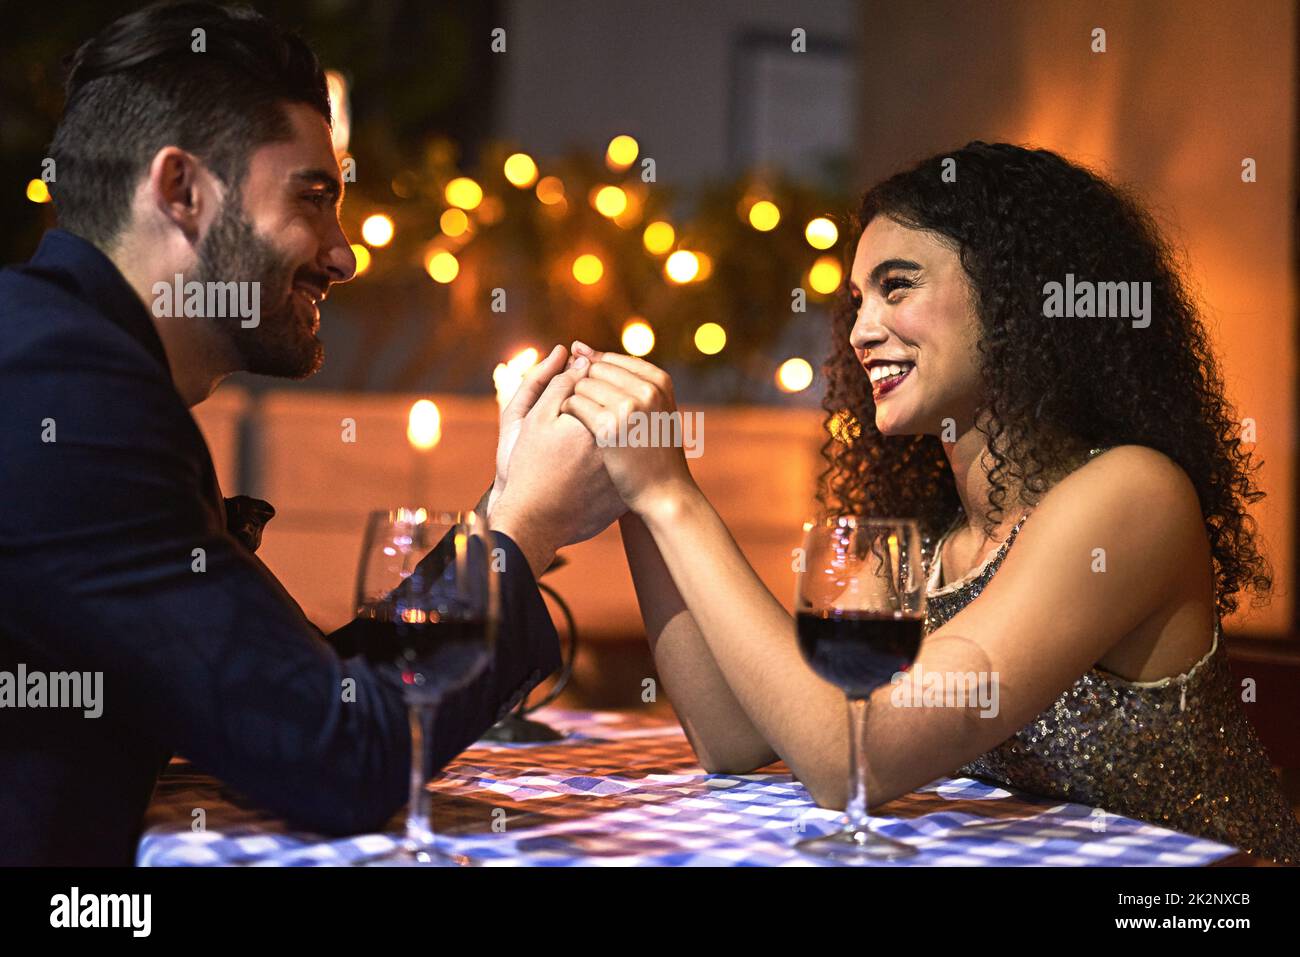 We will stay together forever. Shot of a cheerful young couple holding hands while looking into each others eyes over a candle lit dinner date at night. Stock Photo